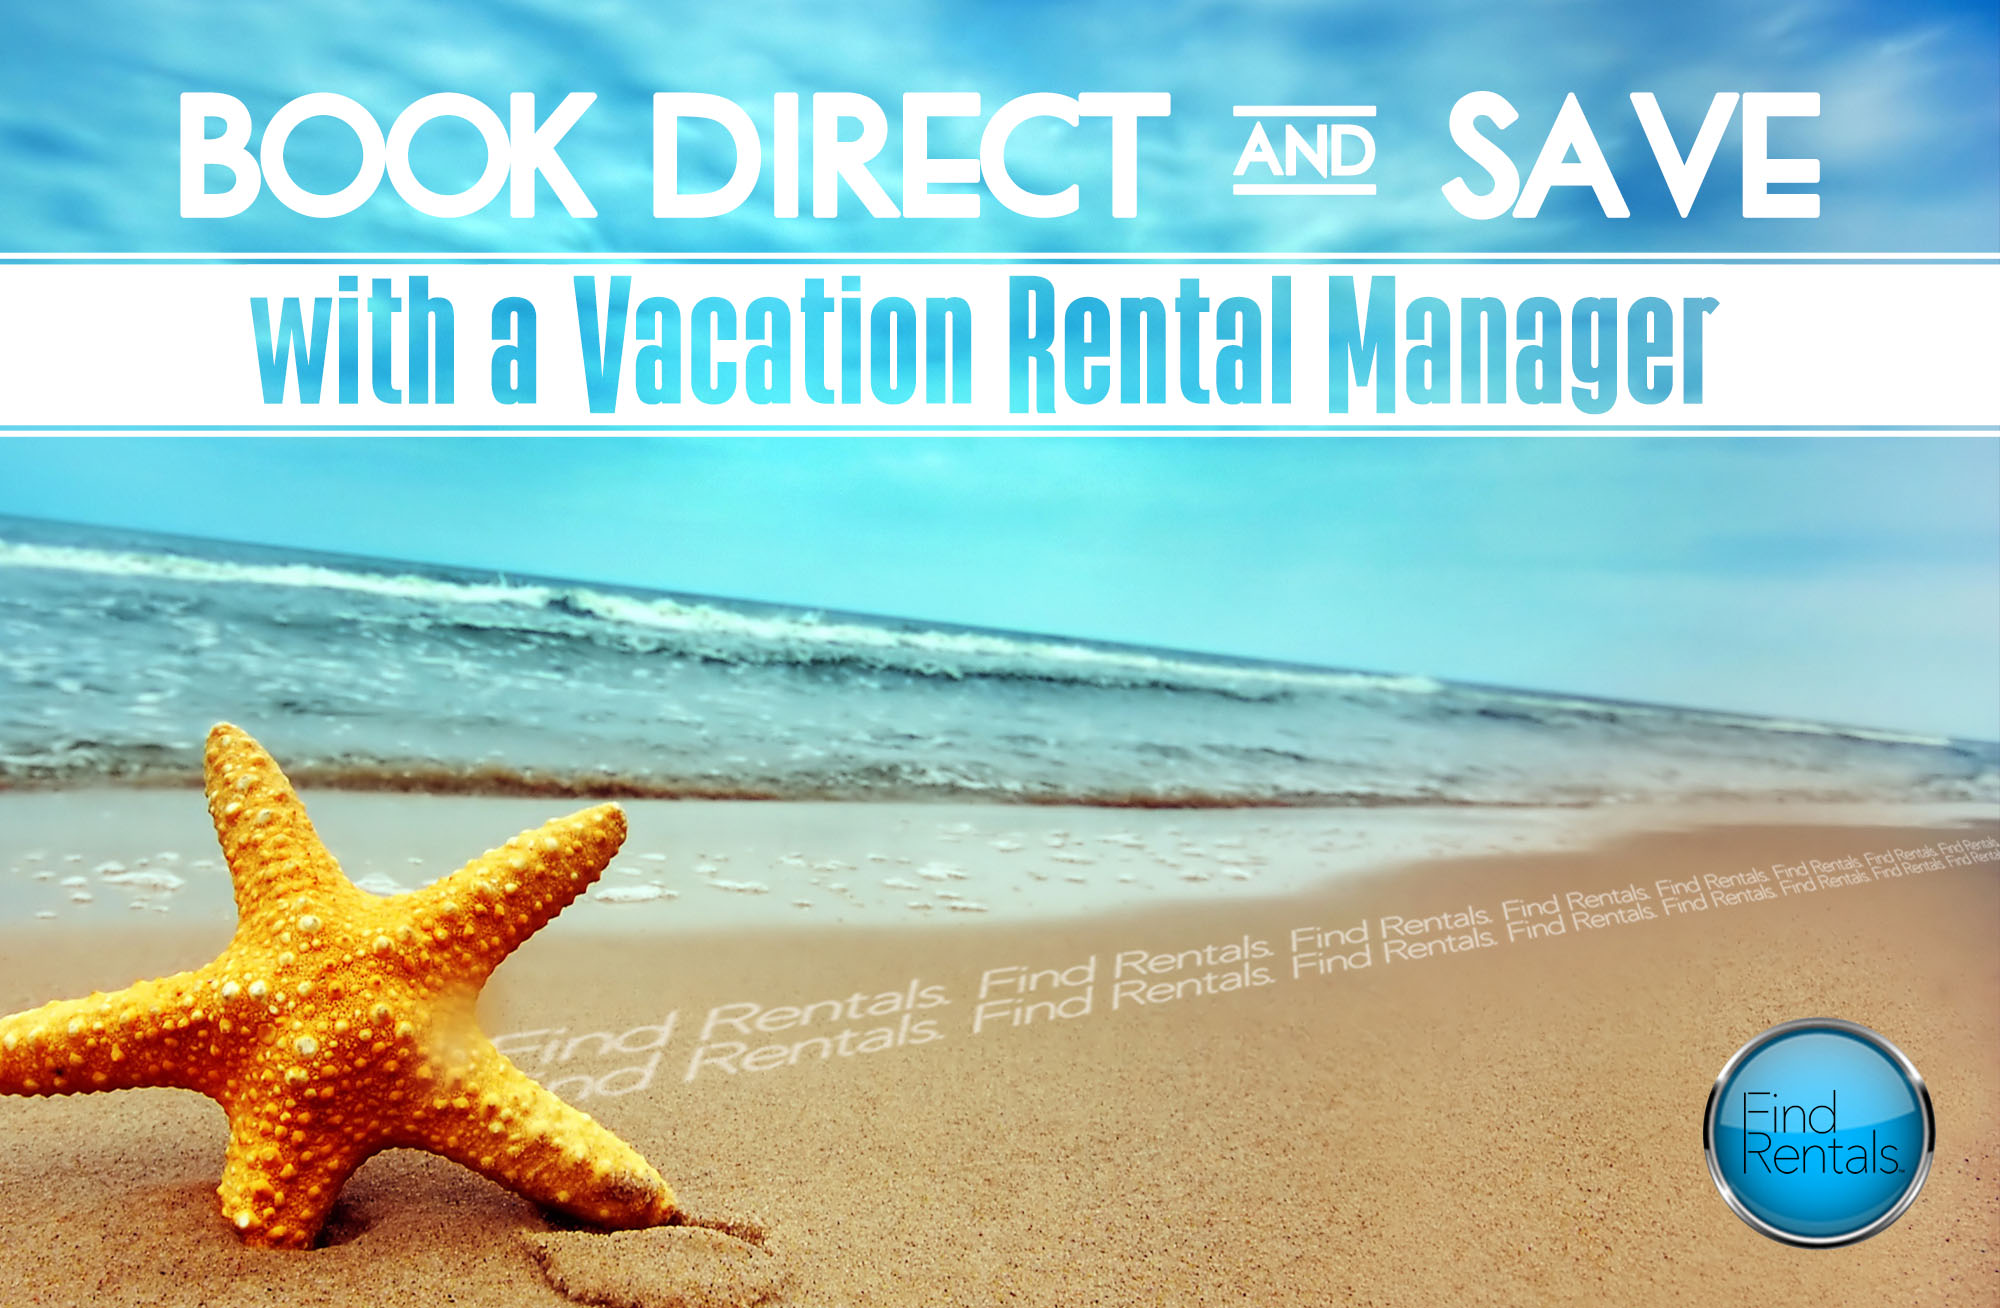 Book with a Bahamas Vacation Rental Manager